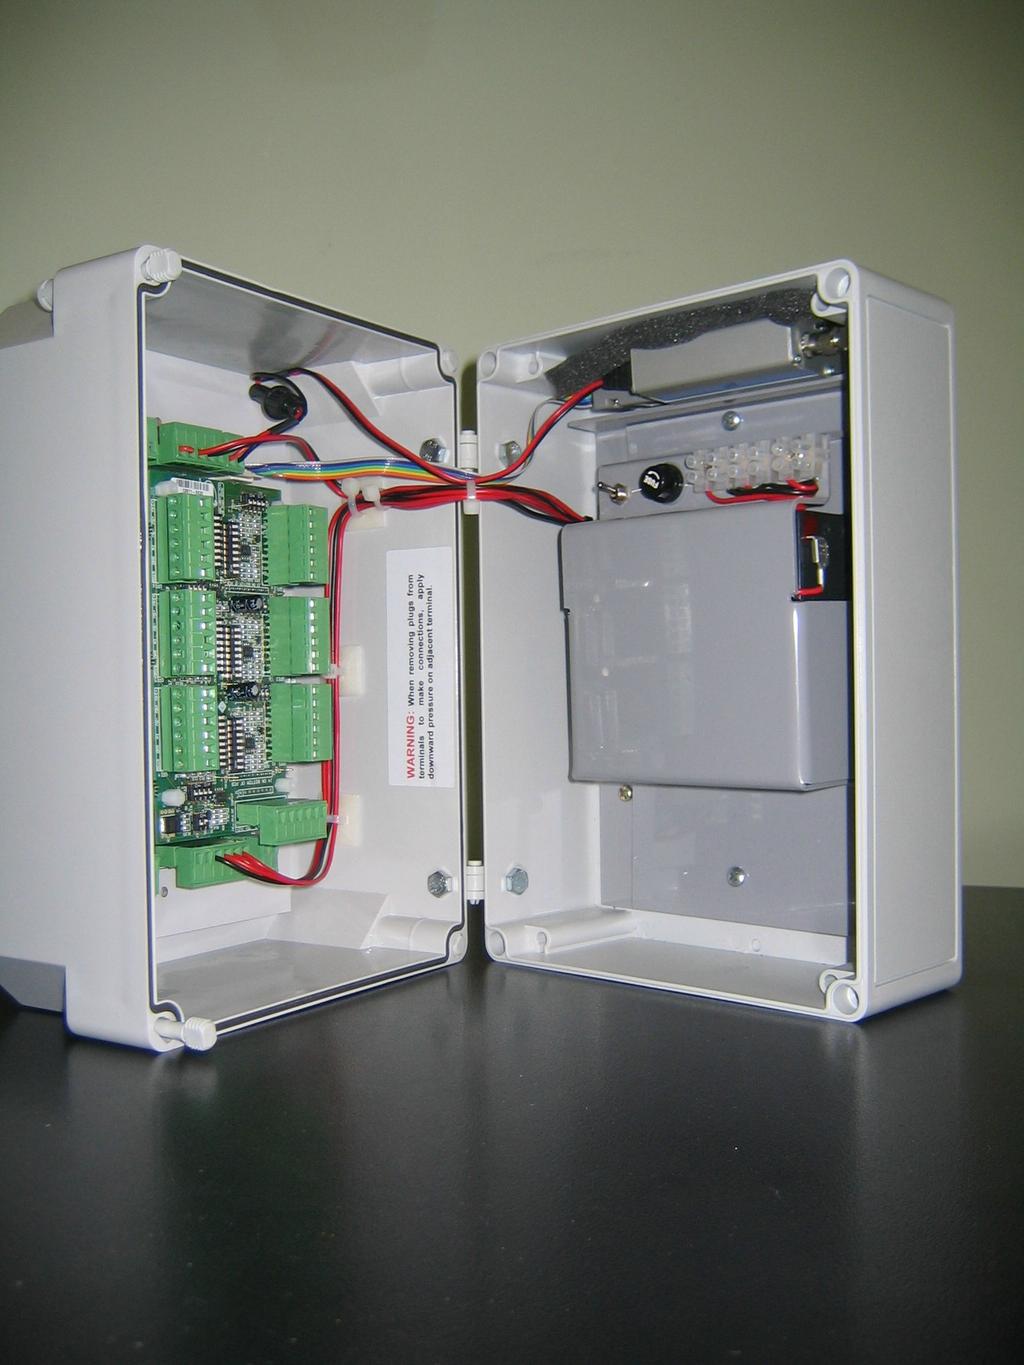 DM Construction Enclosure is suitable for outdoors and is IP65 rated It has a hinged lid. The electronics circuit is mounted in the lid for easy access to the terminals.